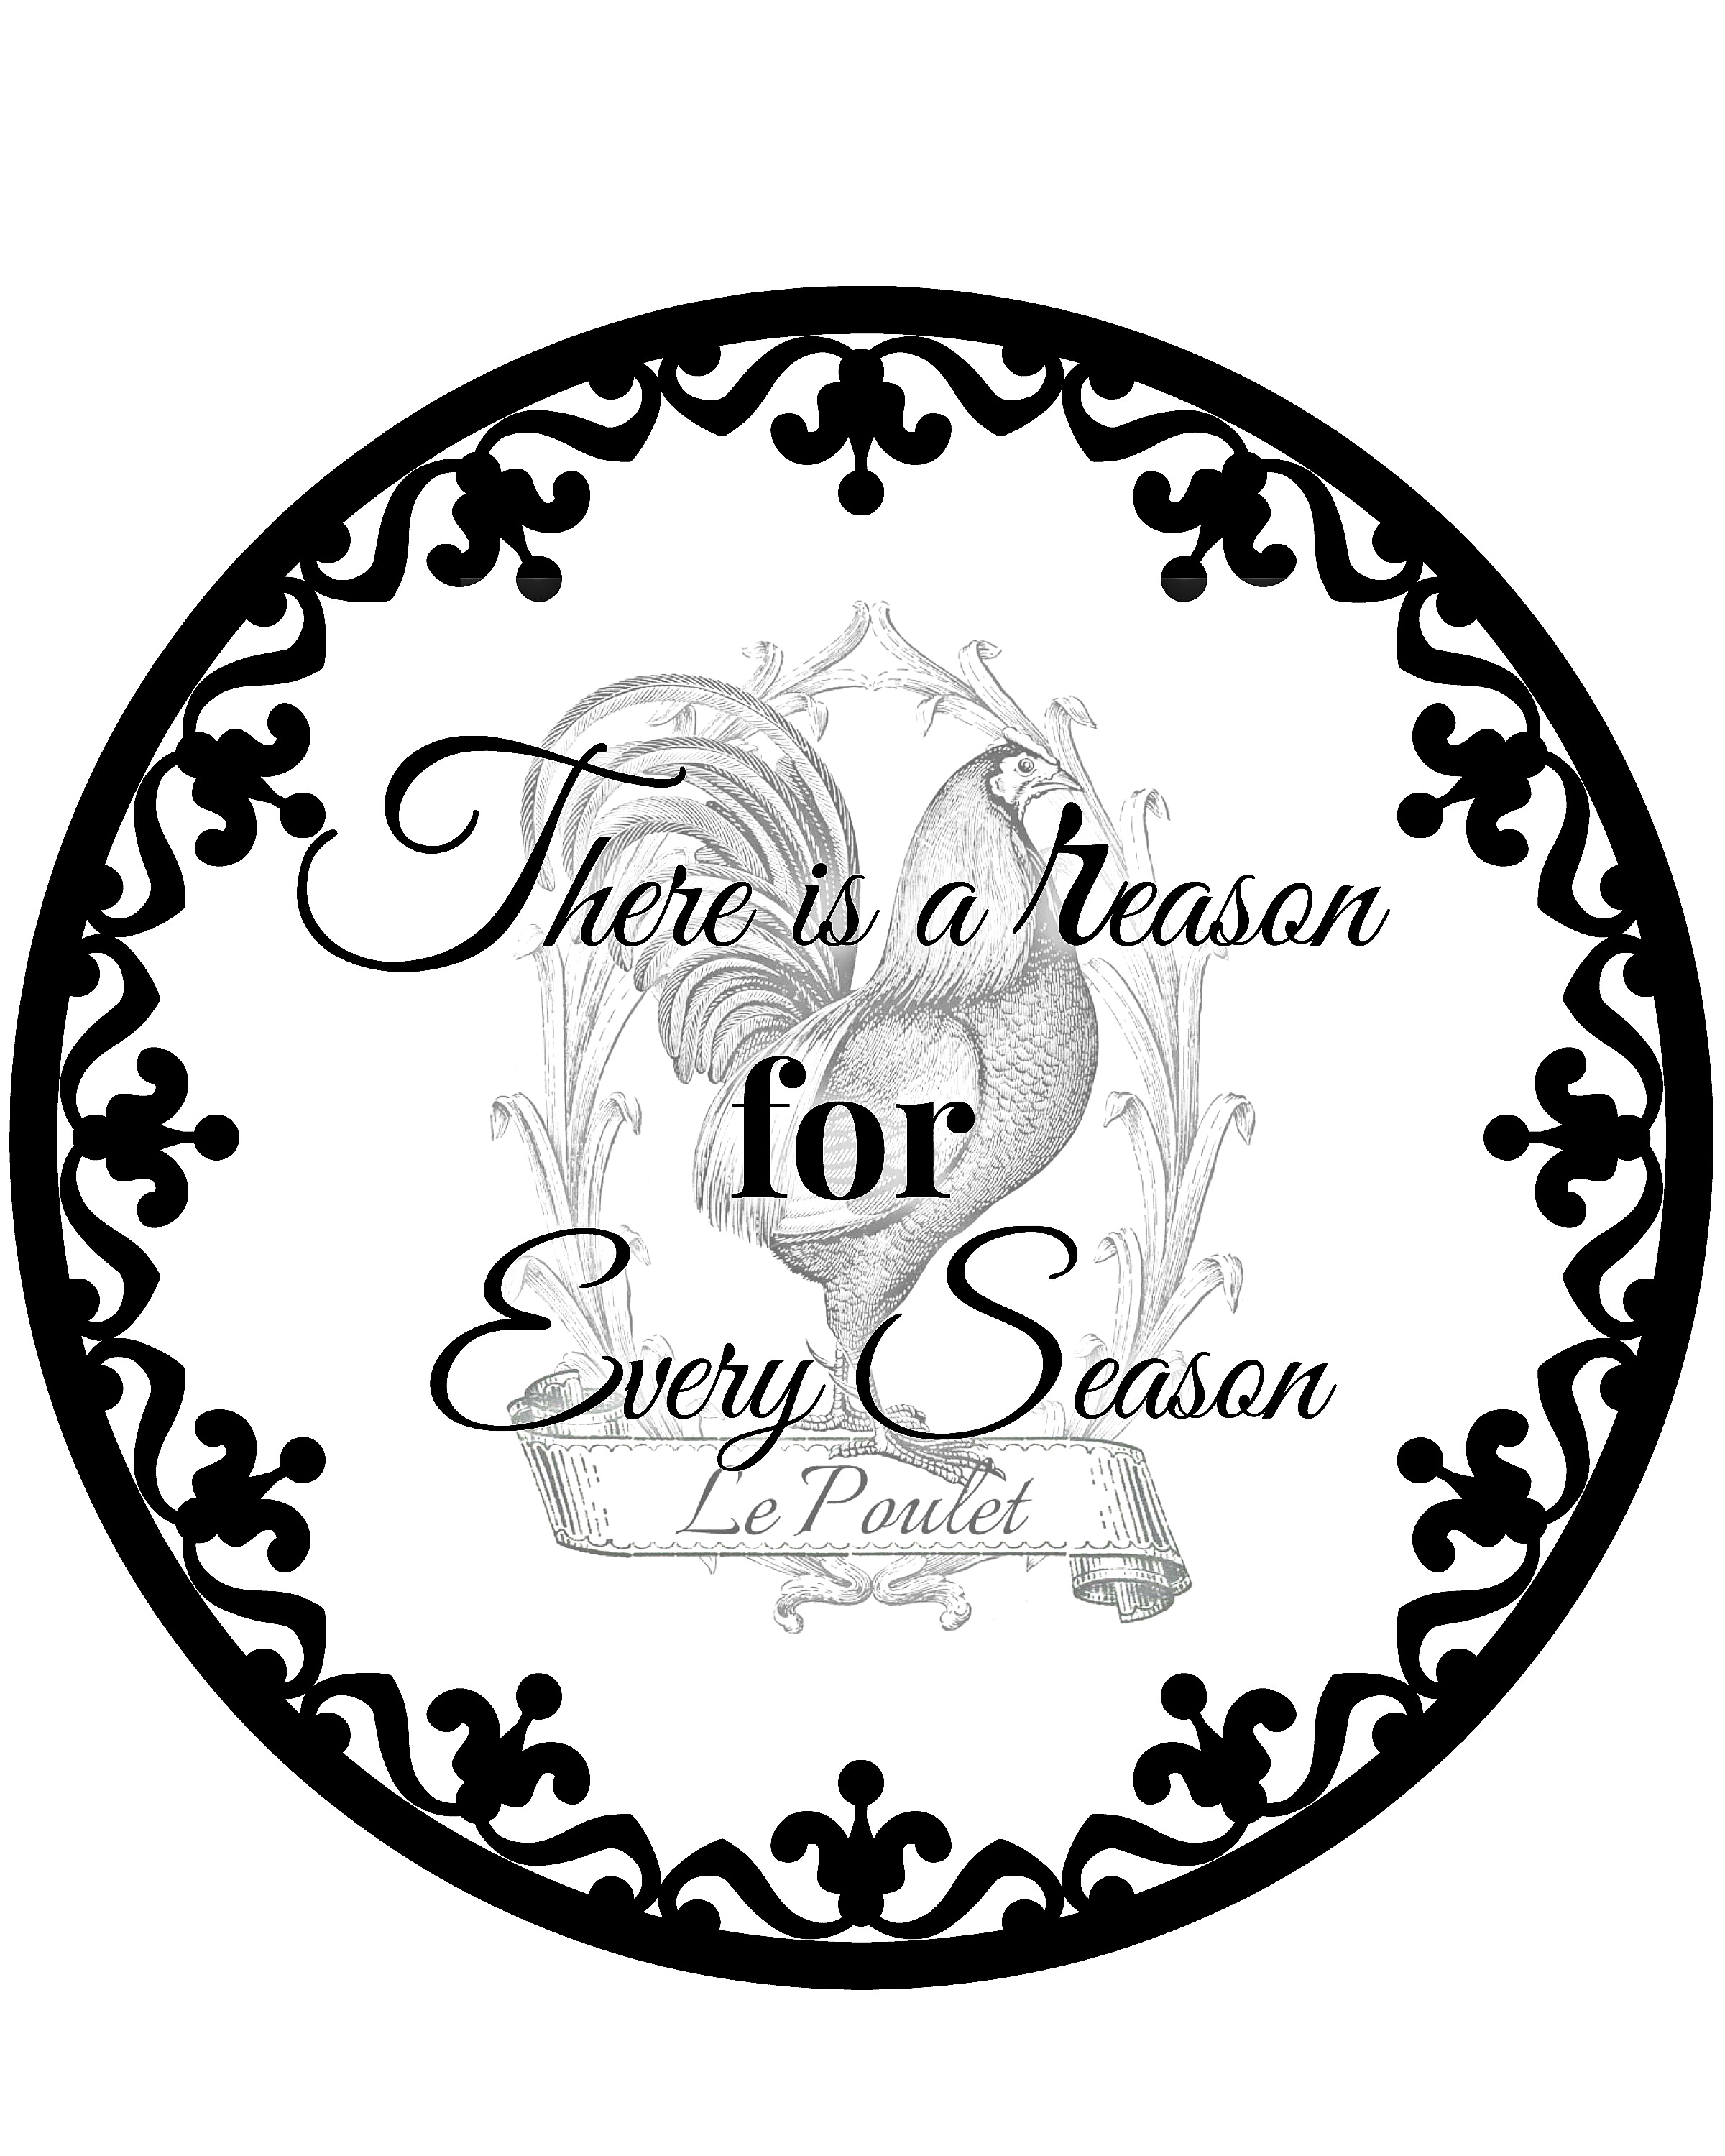 There is a reason for every season